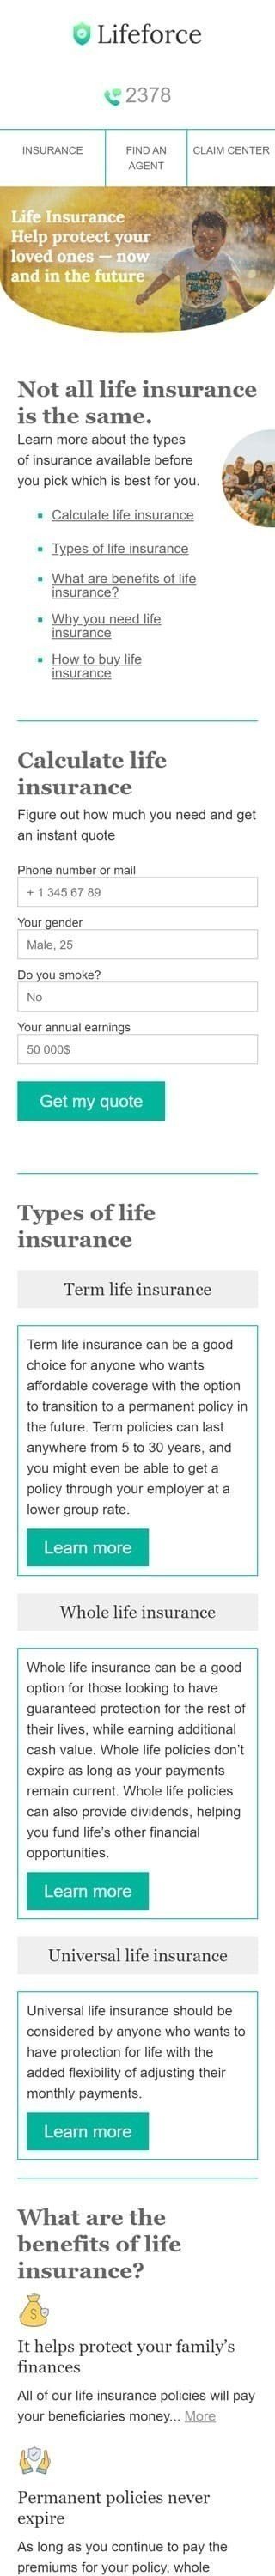 Promo Email Template «Life insurance» for Insurance industry mobile view